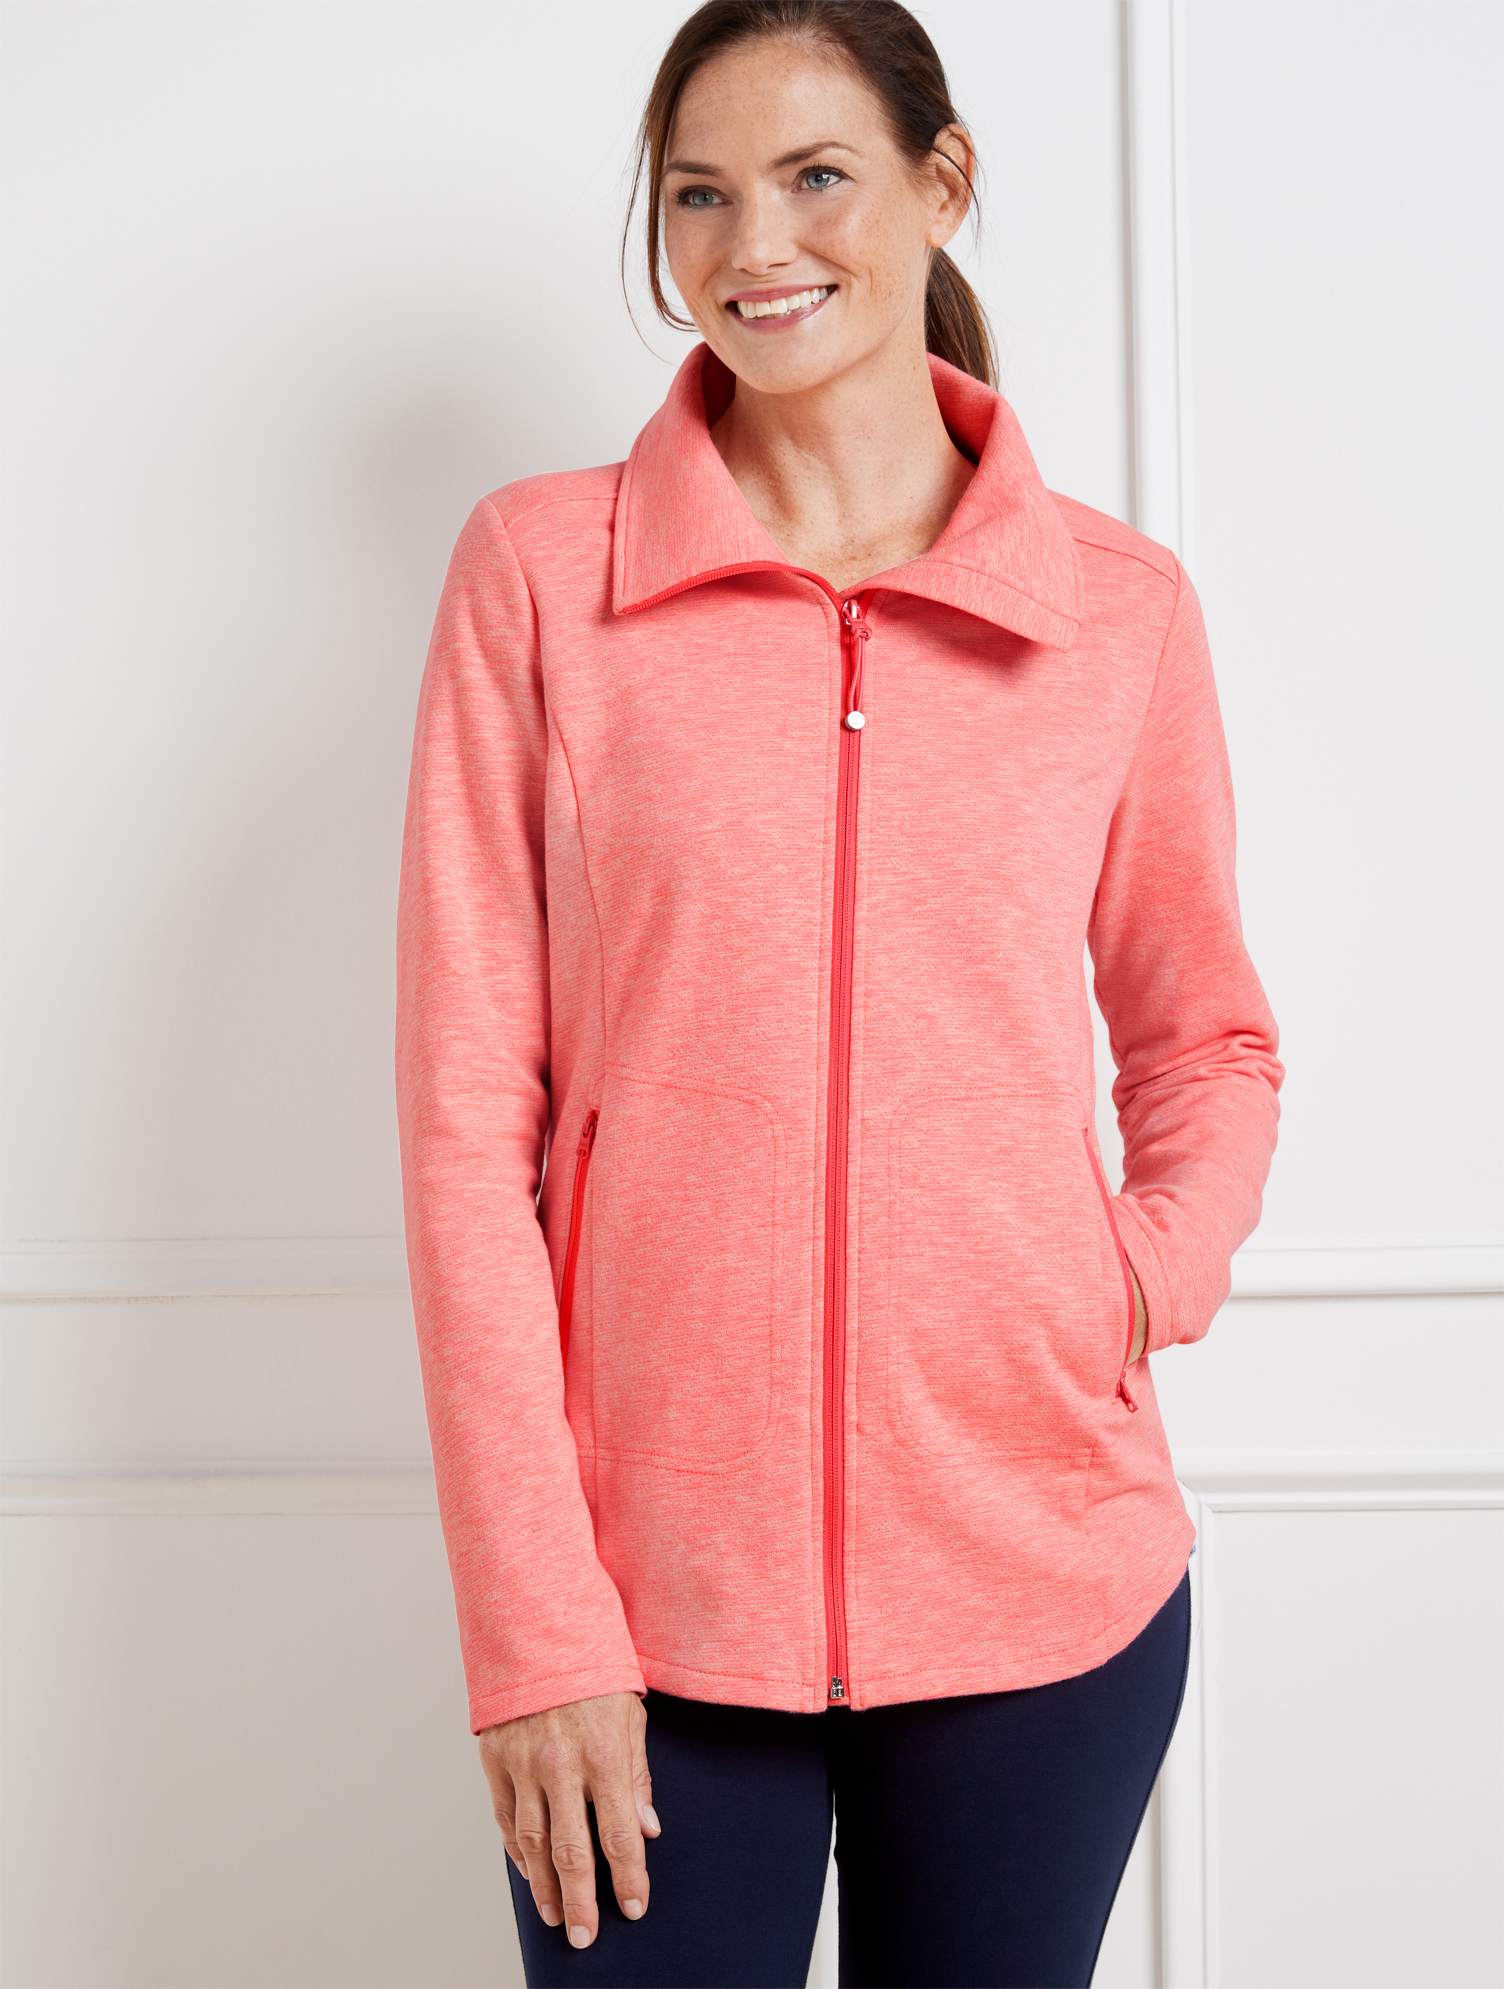 Talbots Petite - Cozy Brushed Terrain Jacket - Coral Flame/ivory - Medium  In Coral Flame,ivory